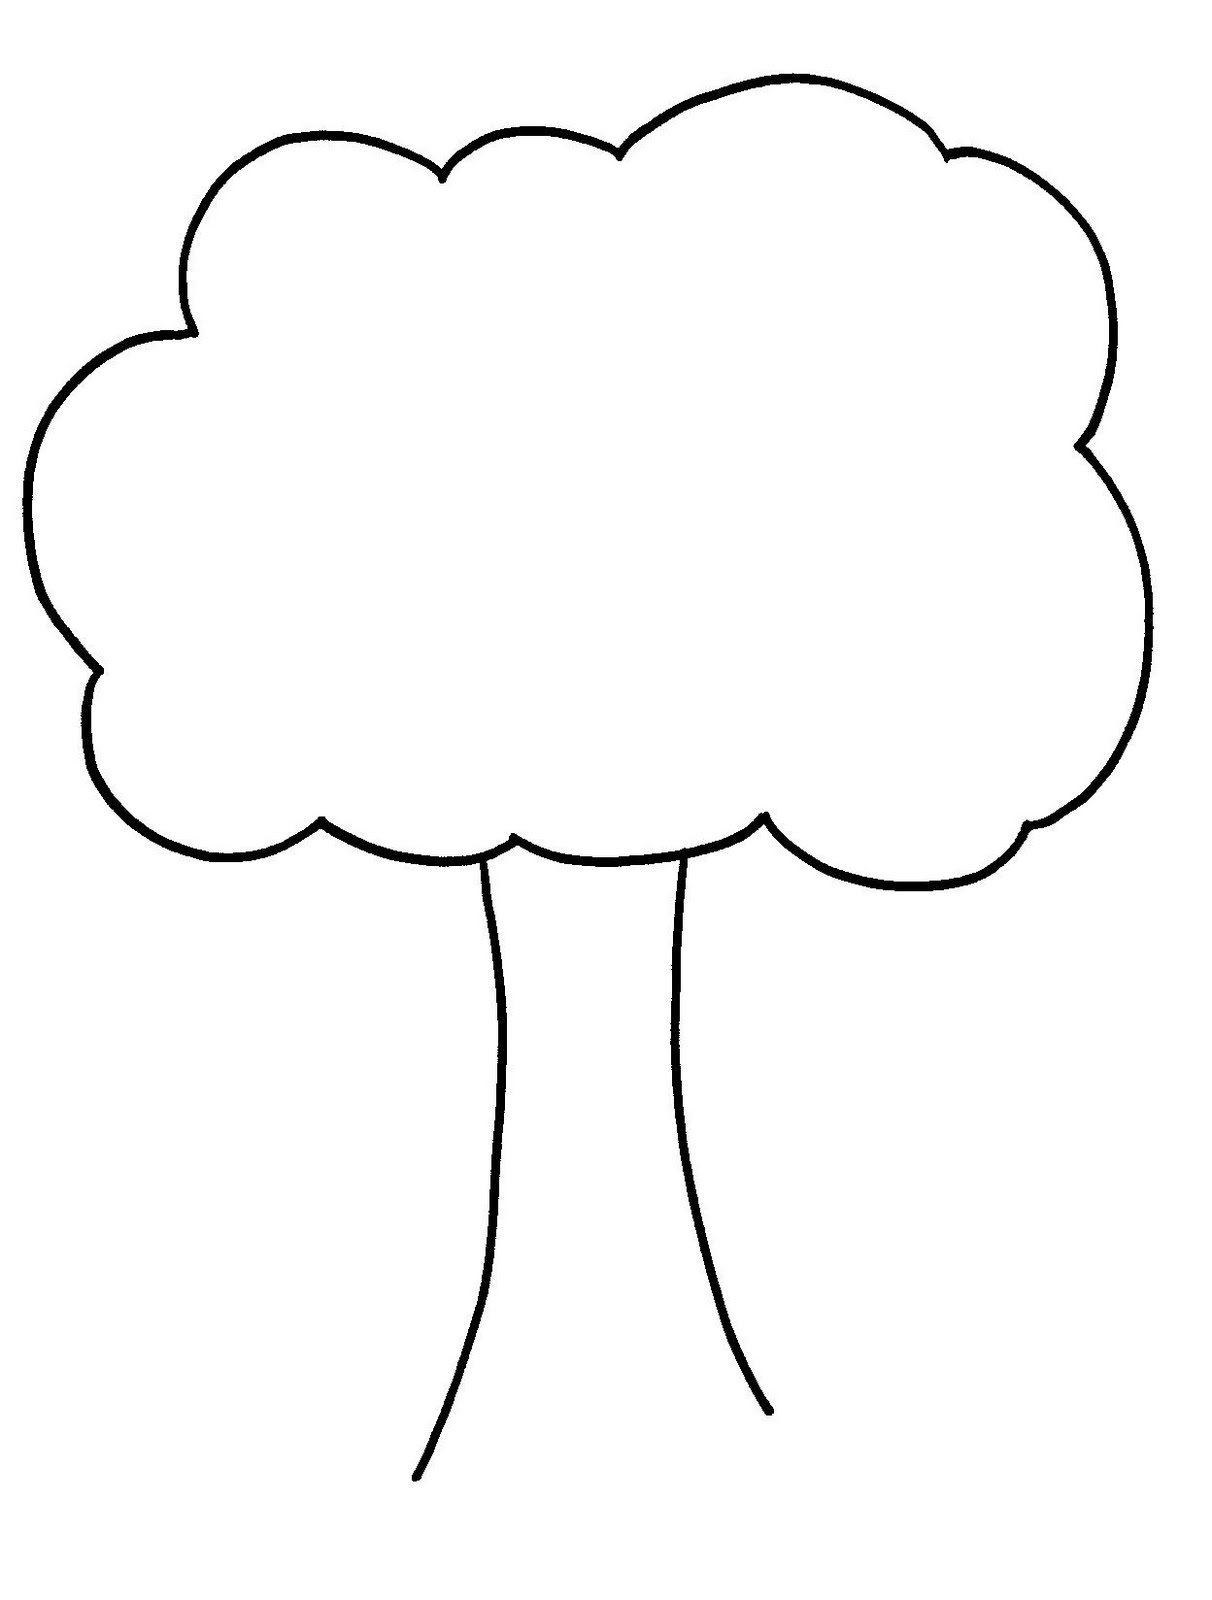 Images For > Tree Outline